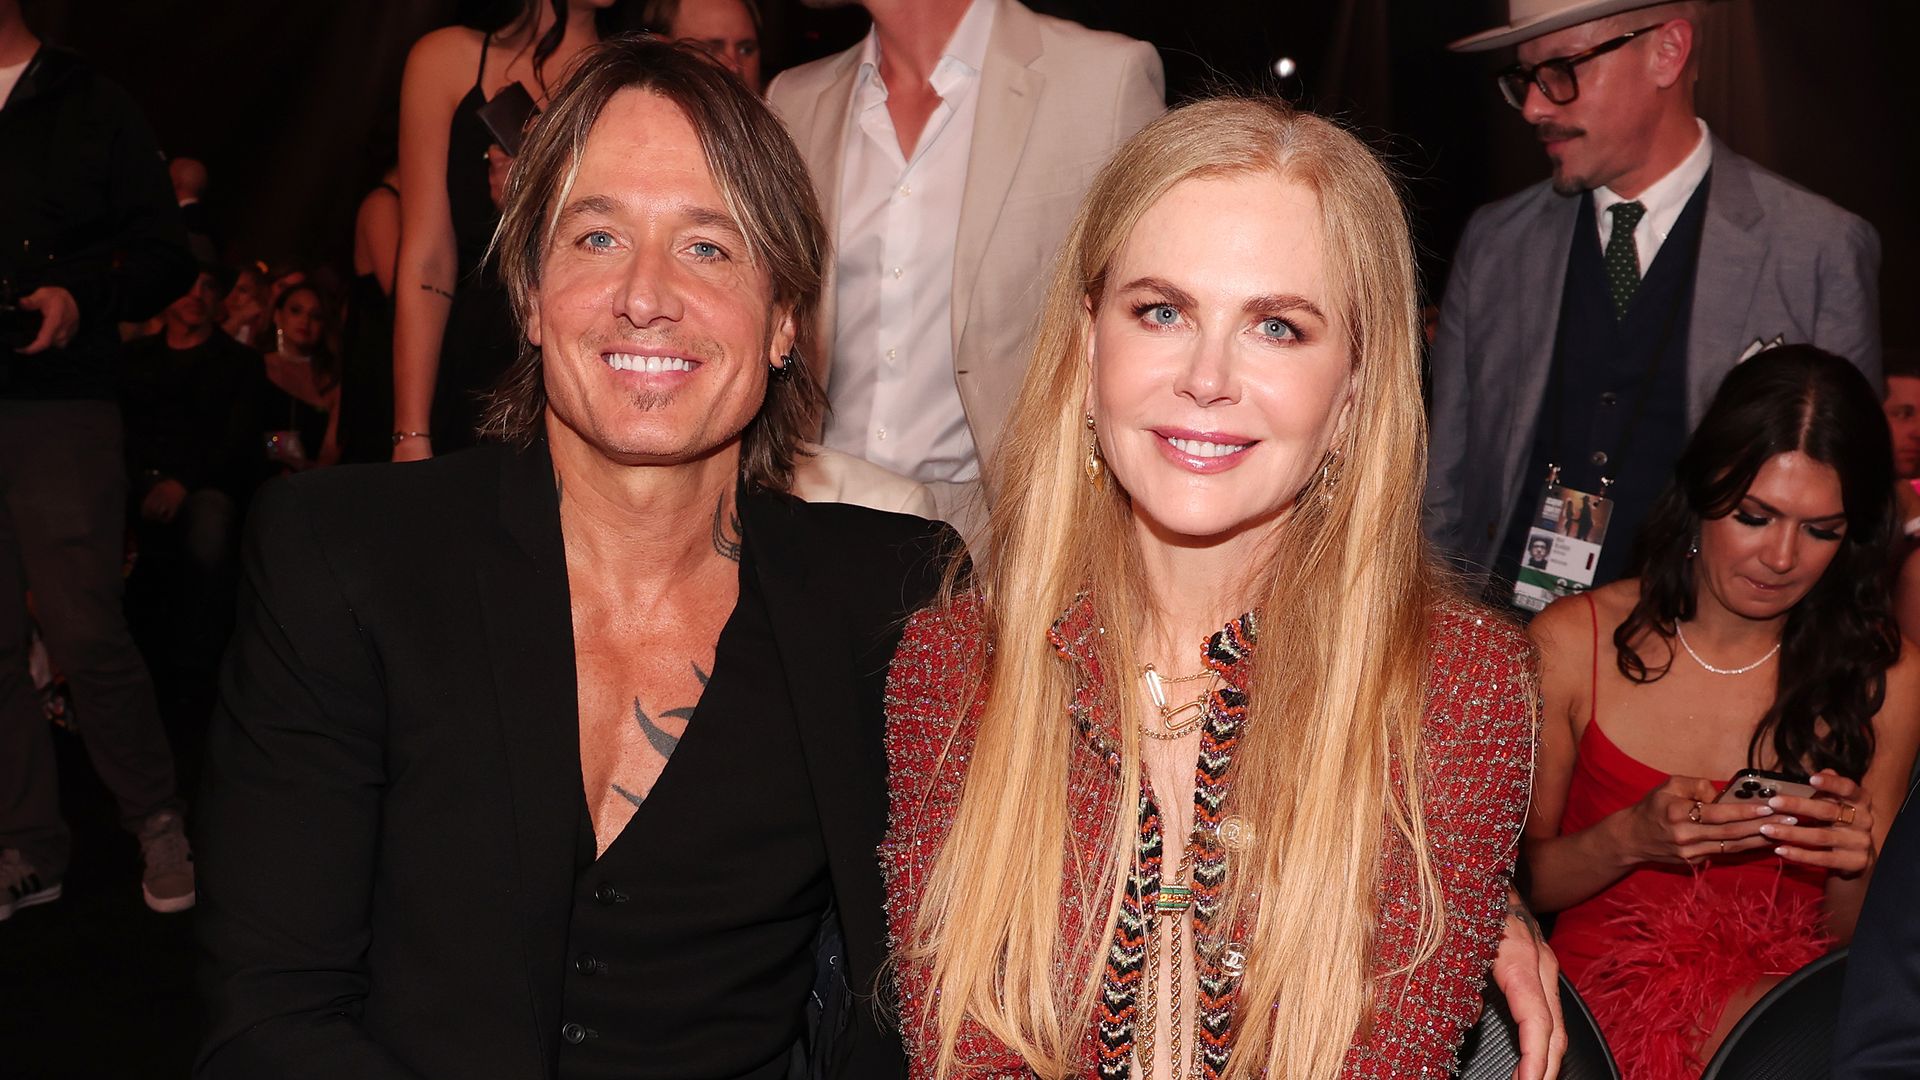 Keith Urban and Nicole Kidman sat smiling at the 58th Academy of Country Music Awards